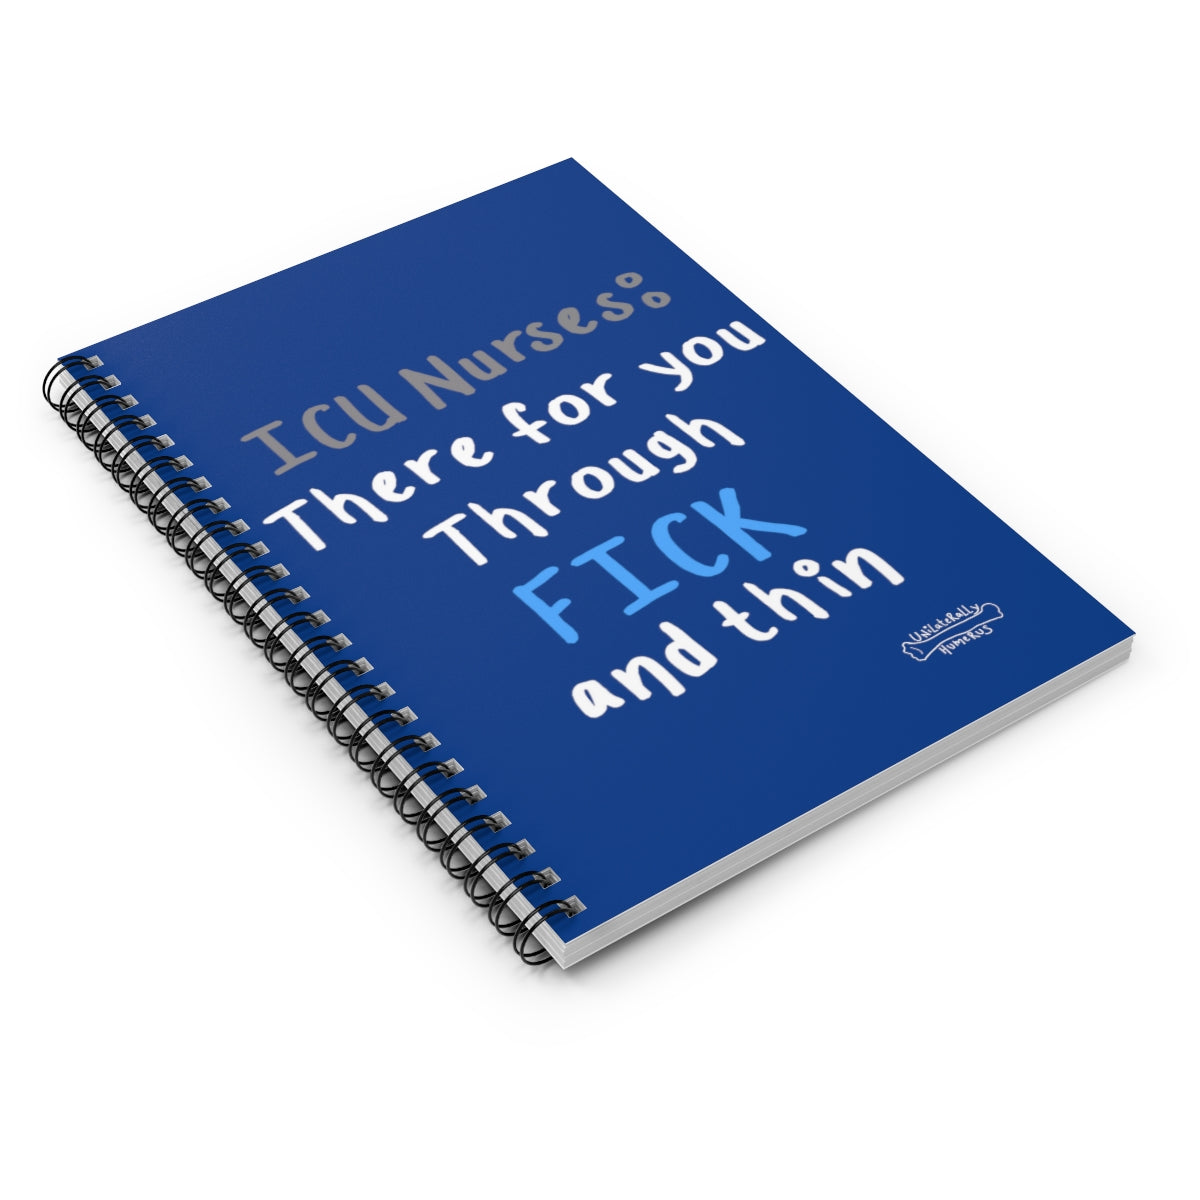 Fick and Thin Spiral Notebook